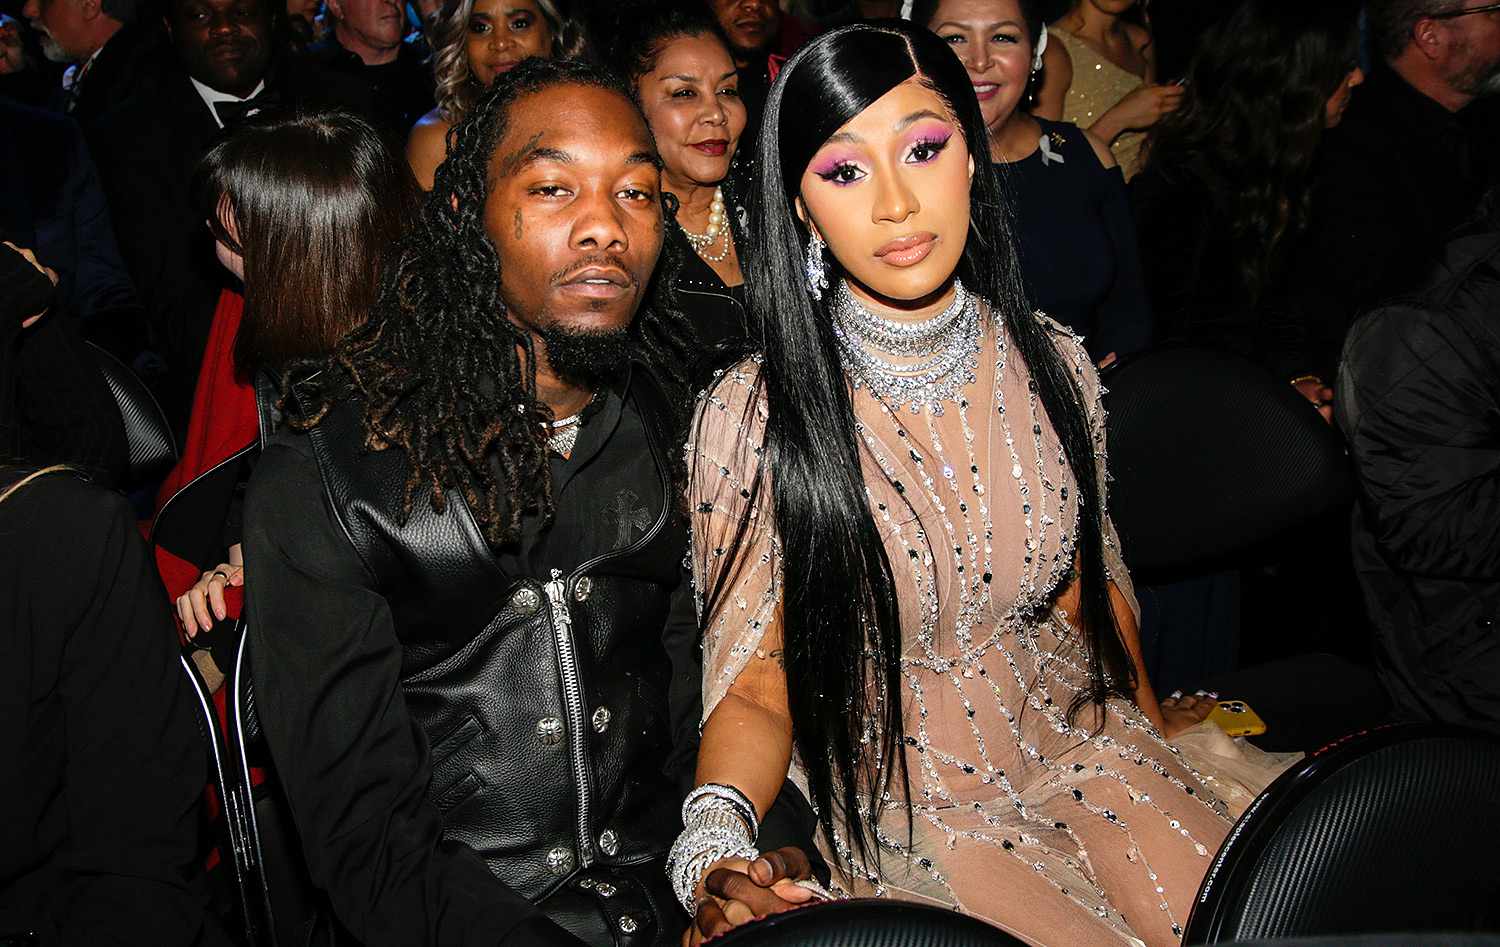 Cardi B and Offset